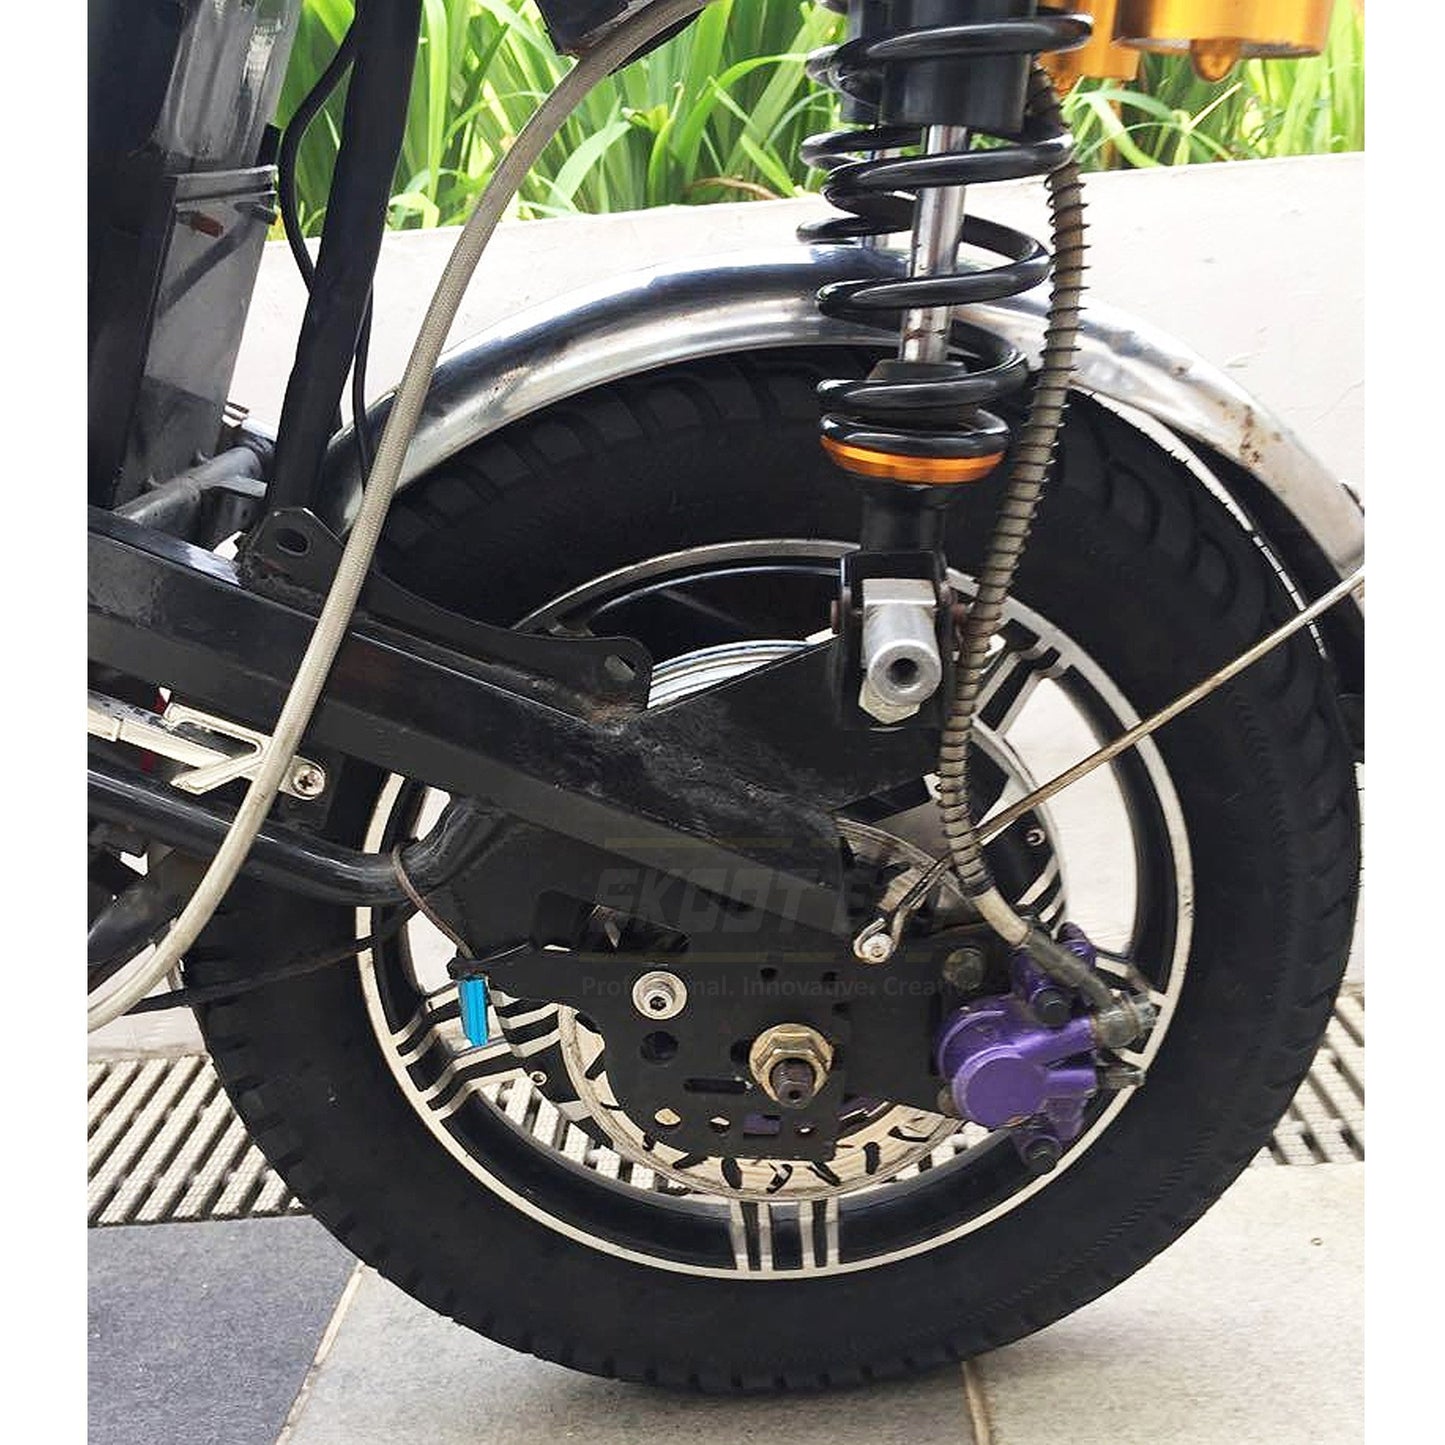 We offer 16-inch x 3.0 tire and 16-inch x 3.00-12 tire replacement services. A wider tire provides more cushion and acts as extra suspension for your electric bicycle. Simply pay us a visit during business hours.